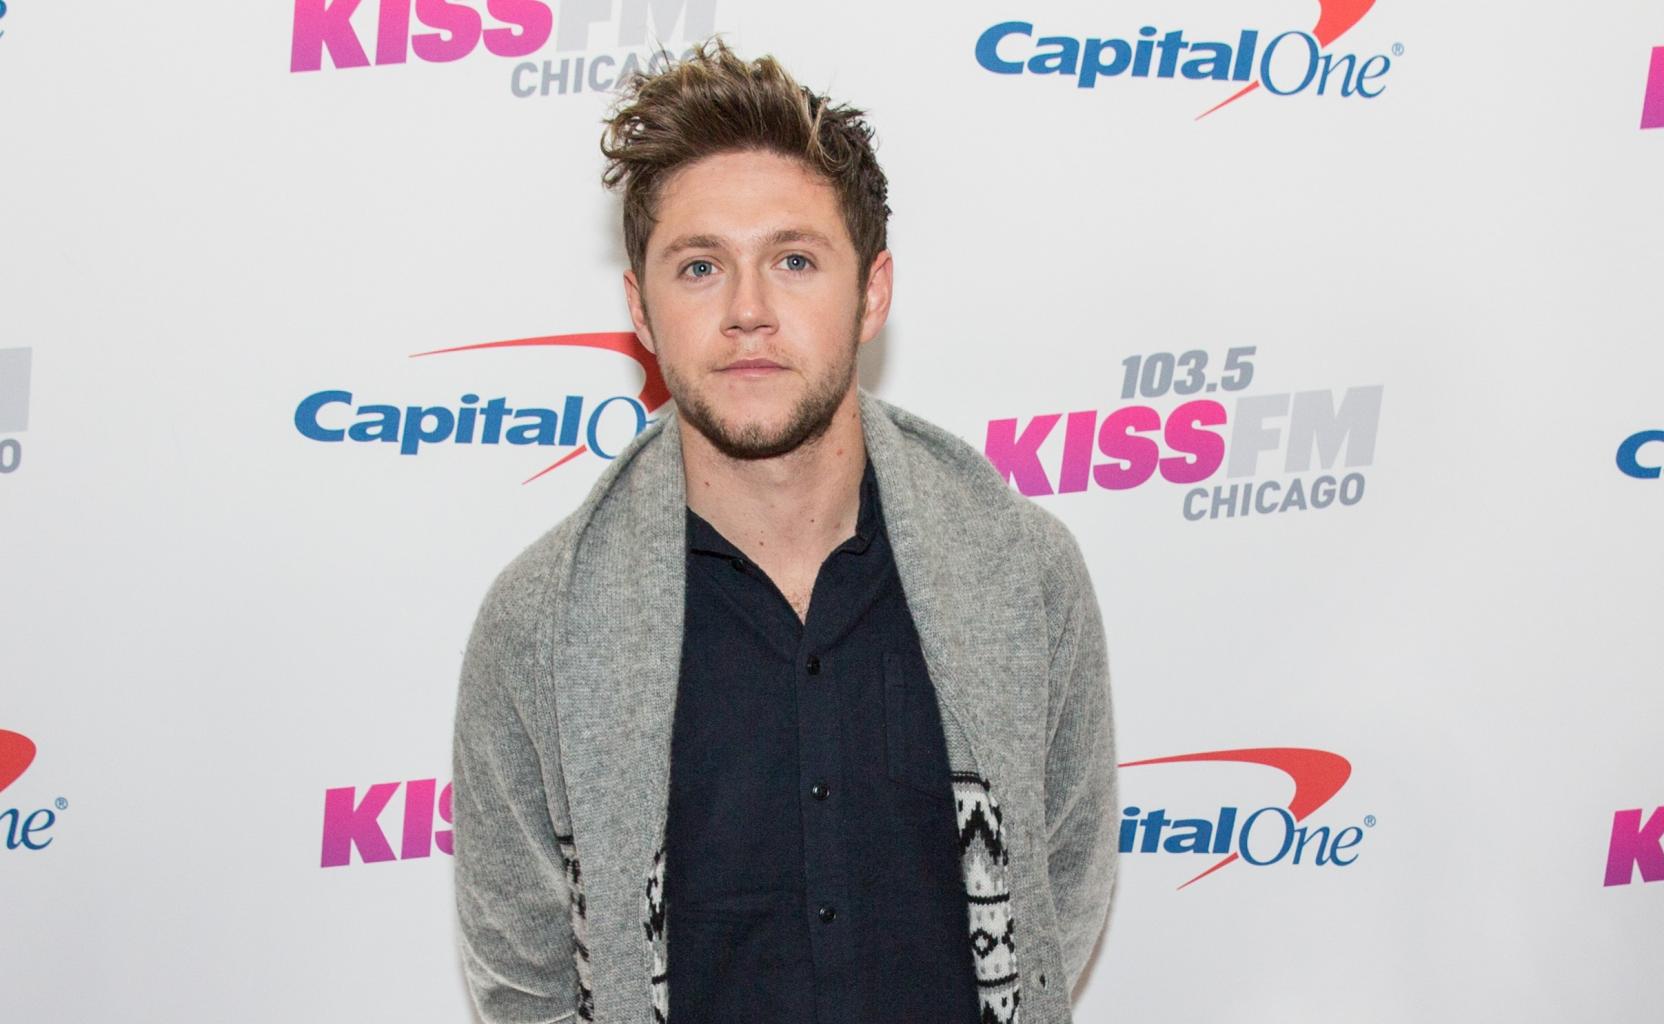 Niall Horan Says He â€˜Spent A Bit Of Time Withâ€™ Canadian Shania Twain â€˜In The Studioâ€™